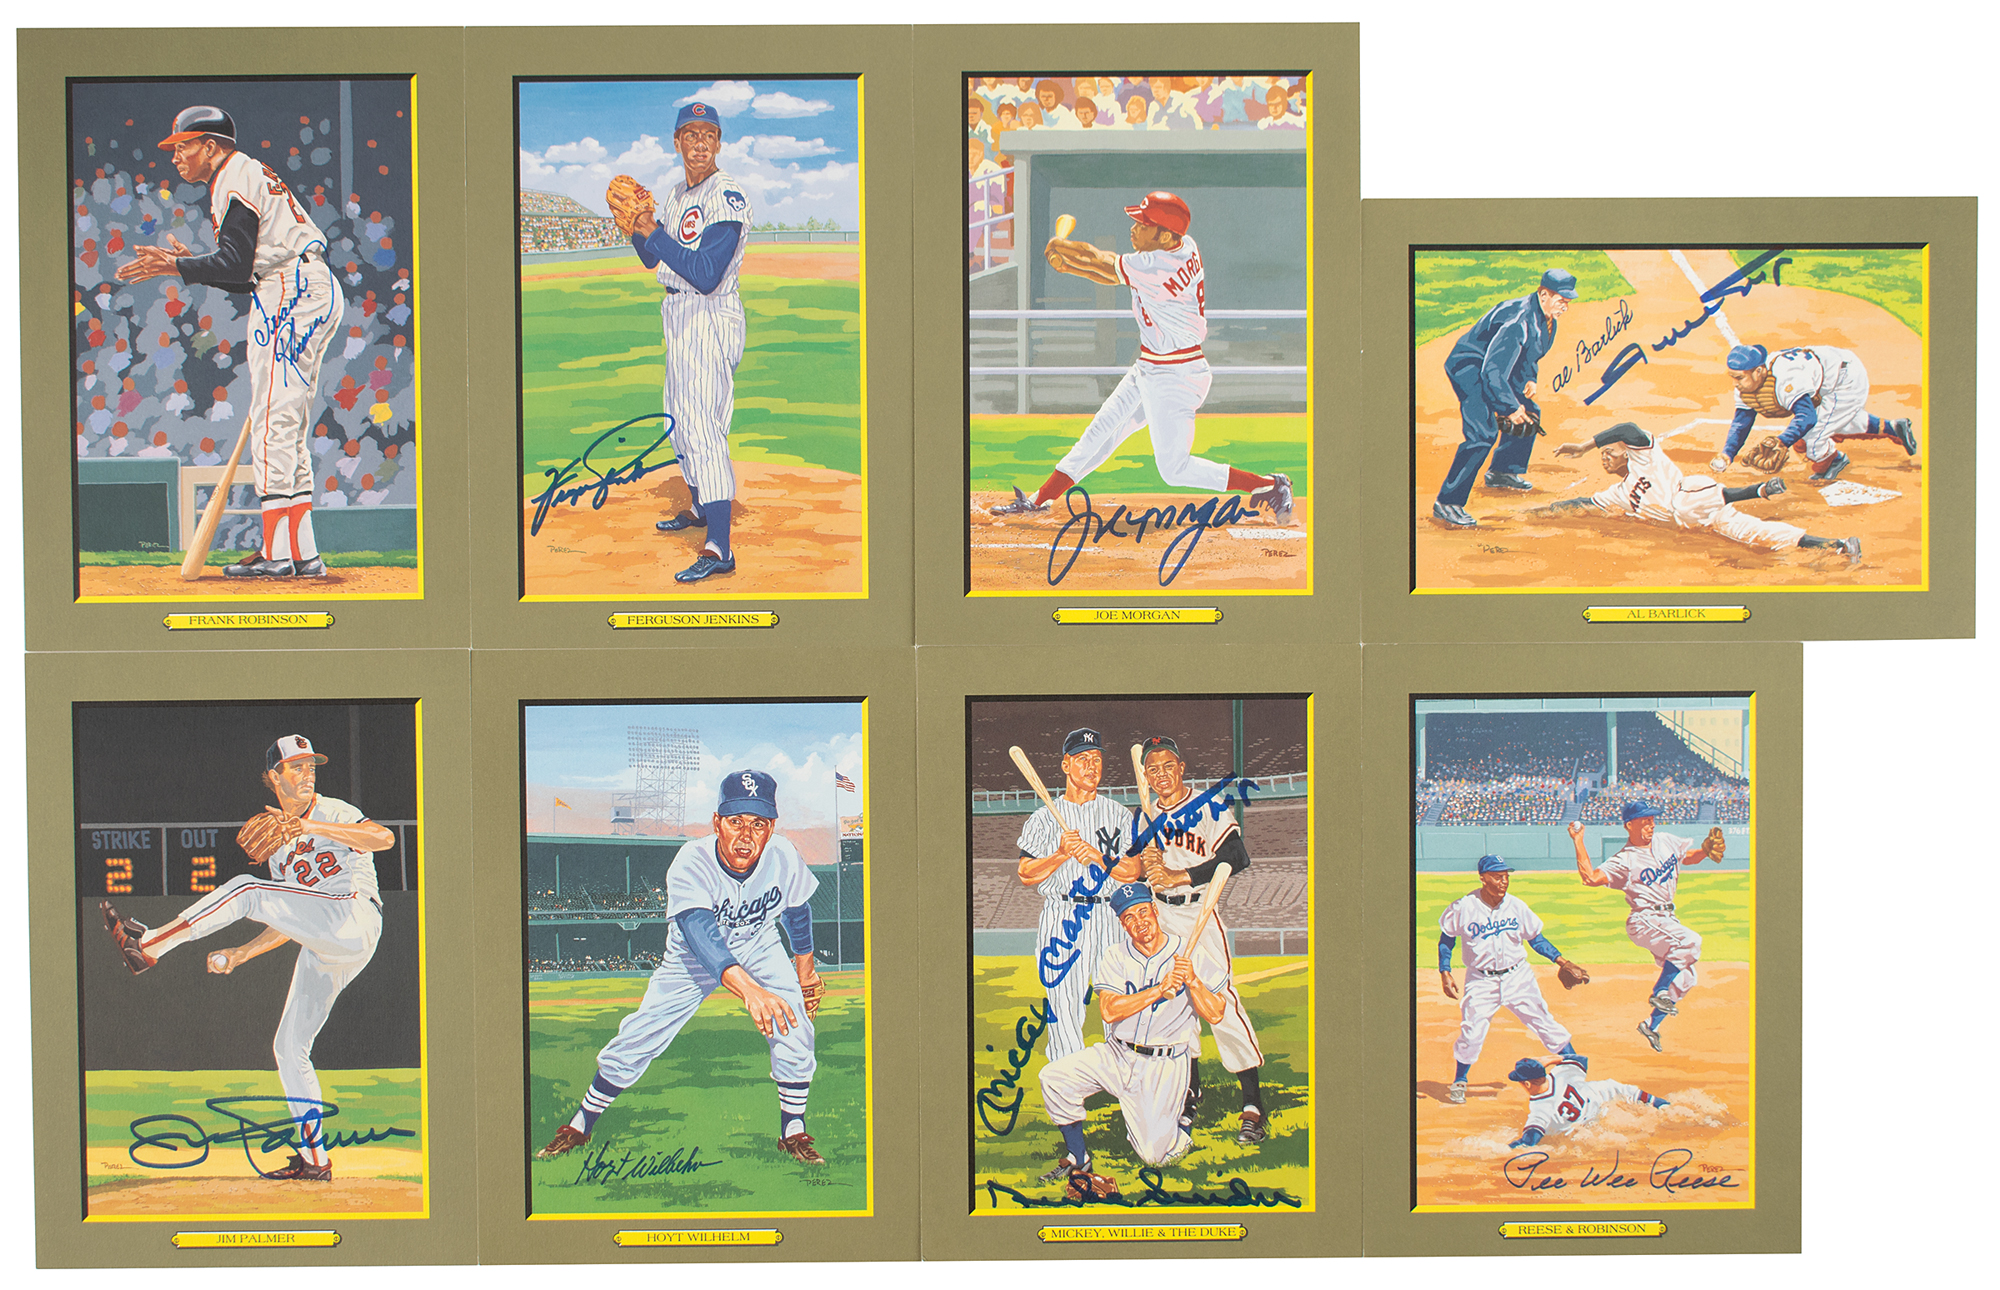 Lot #853 Baseball Hall of Famers (8) Signed Perez-Steele Cards